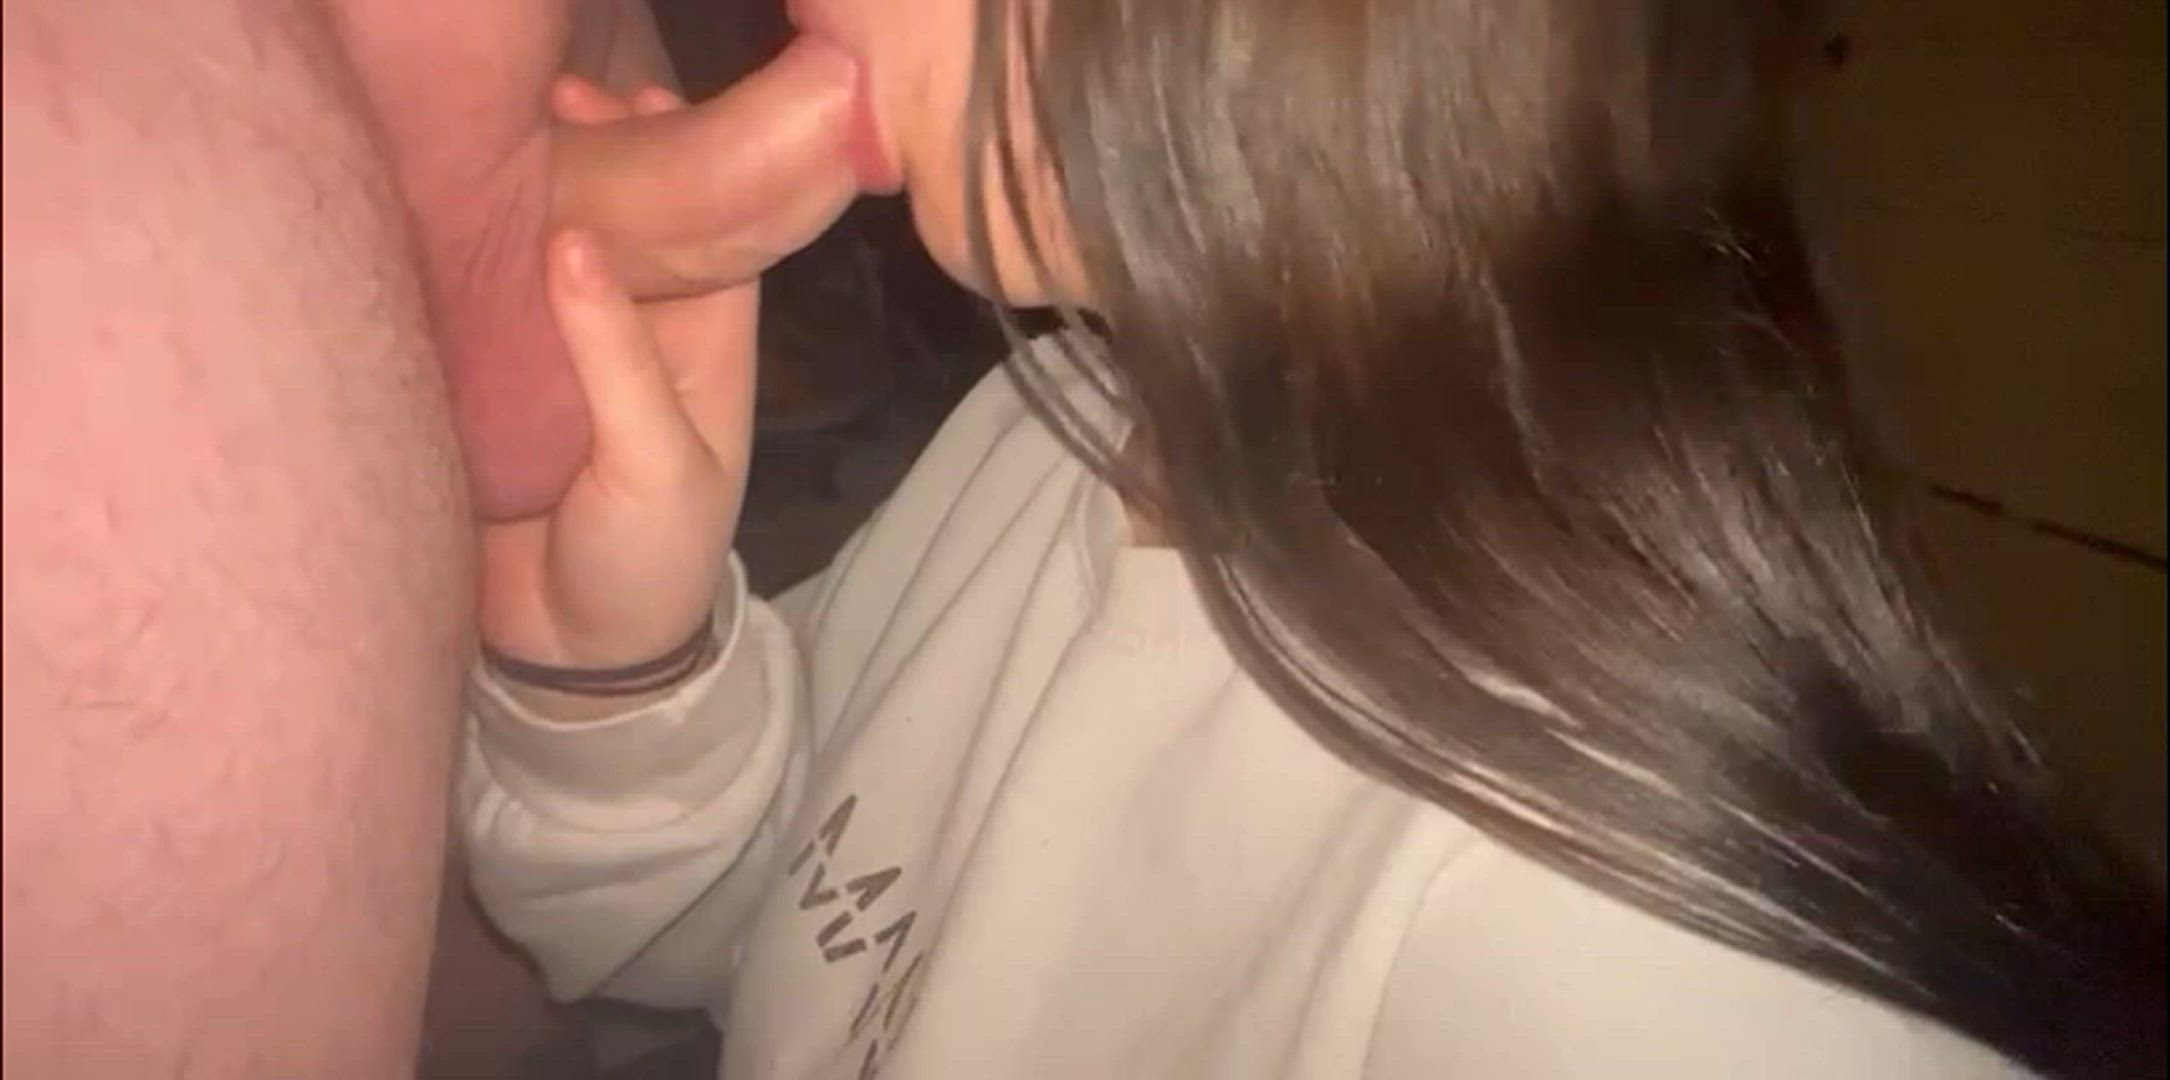 Blowjob porn video with onlyfans model couplesincognito <strong>@coupleincognito69</strong>